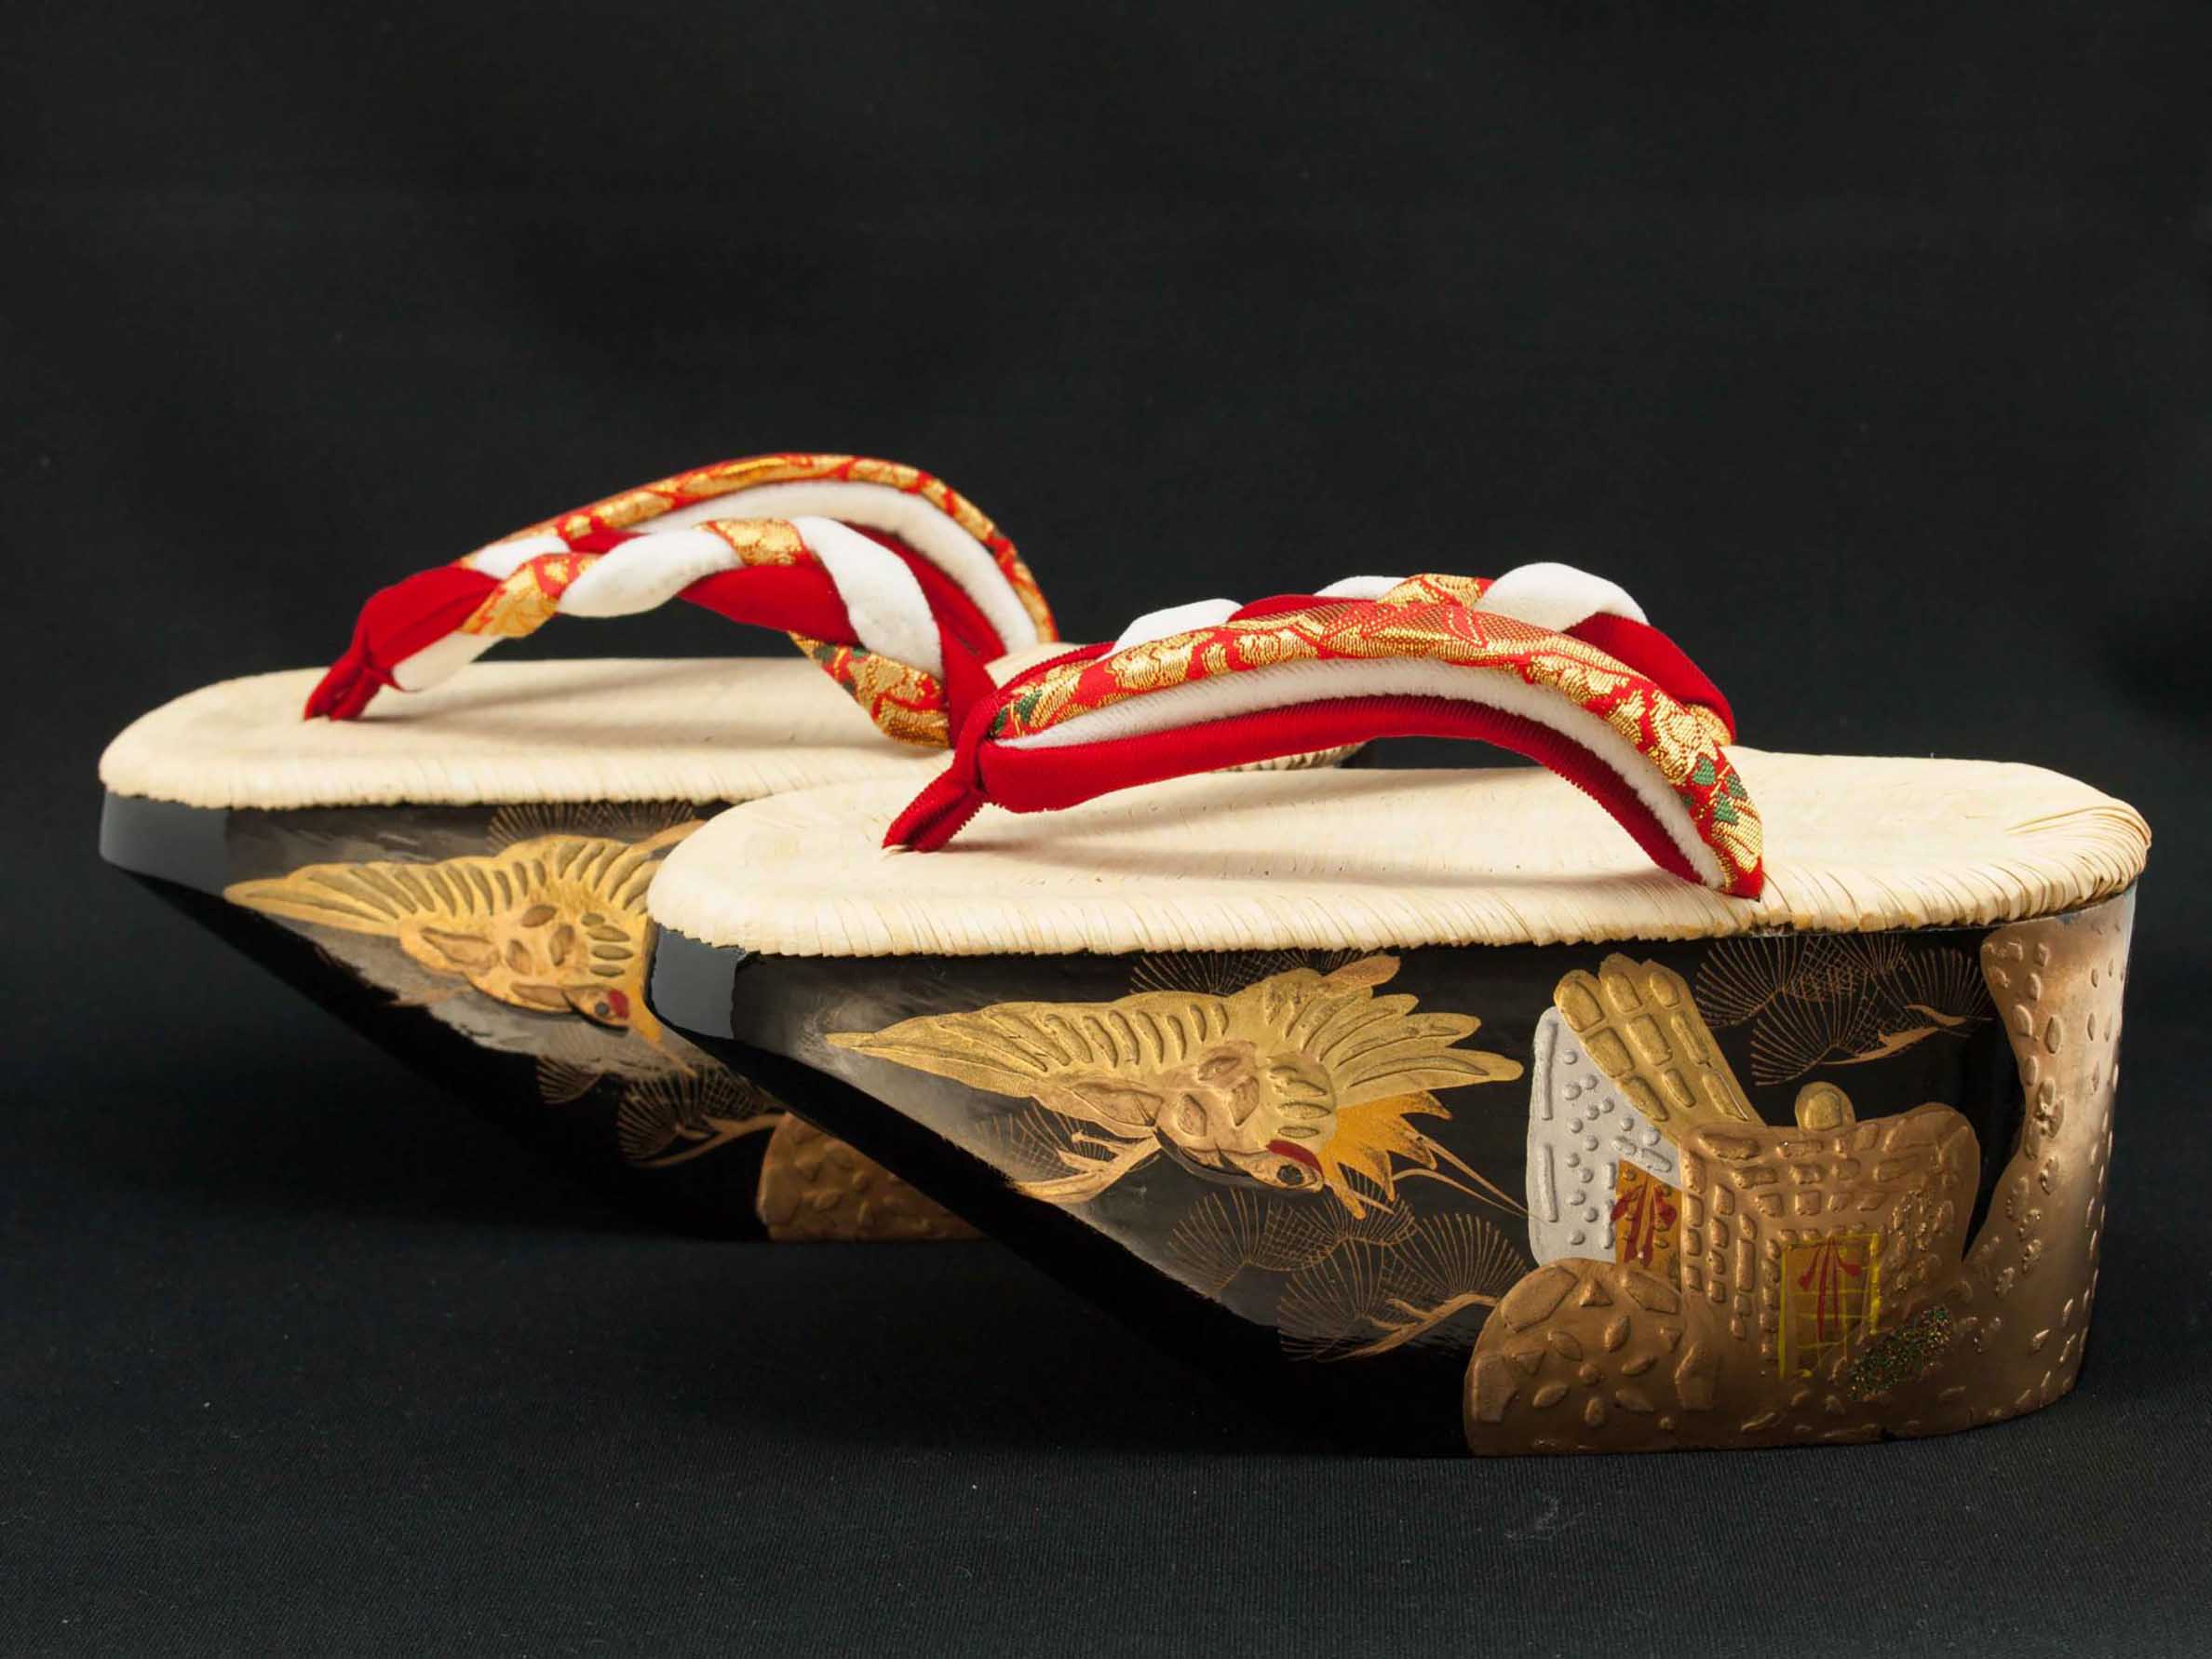 Geta - Wooden clogs made of local trees by traditional craftsmanship in Hita city